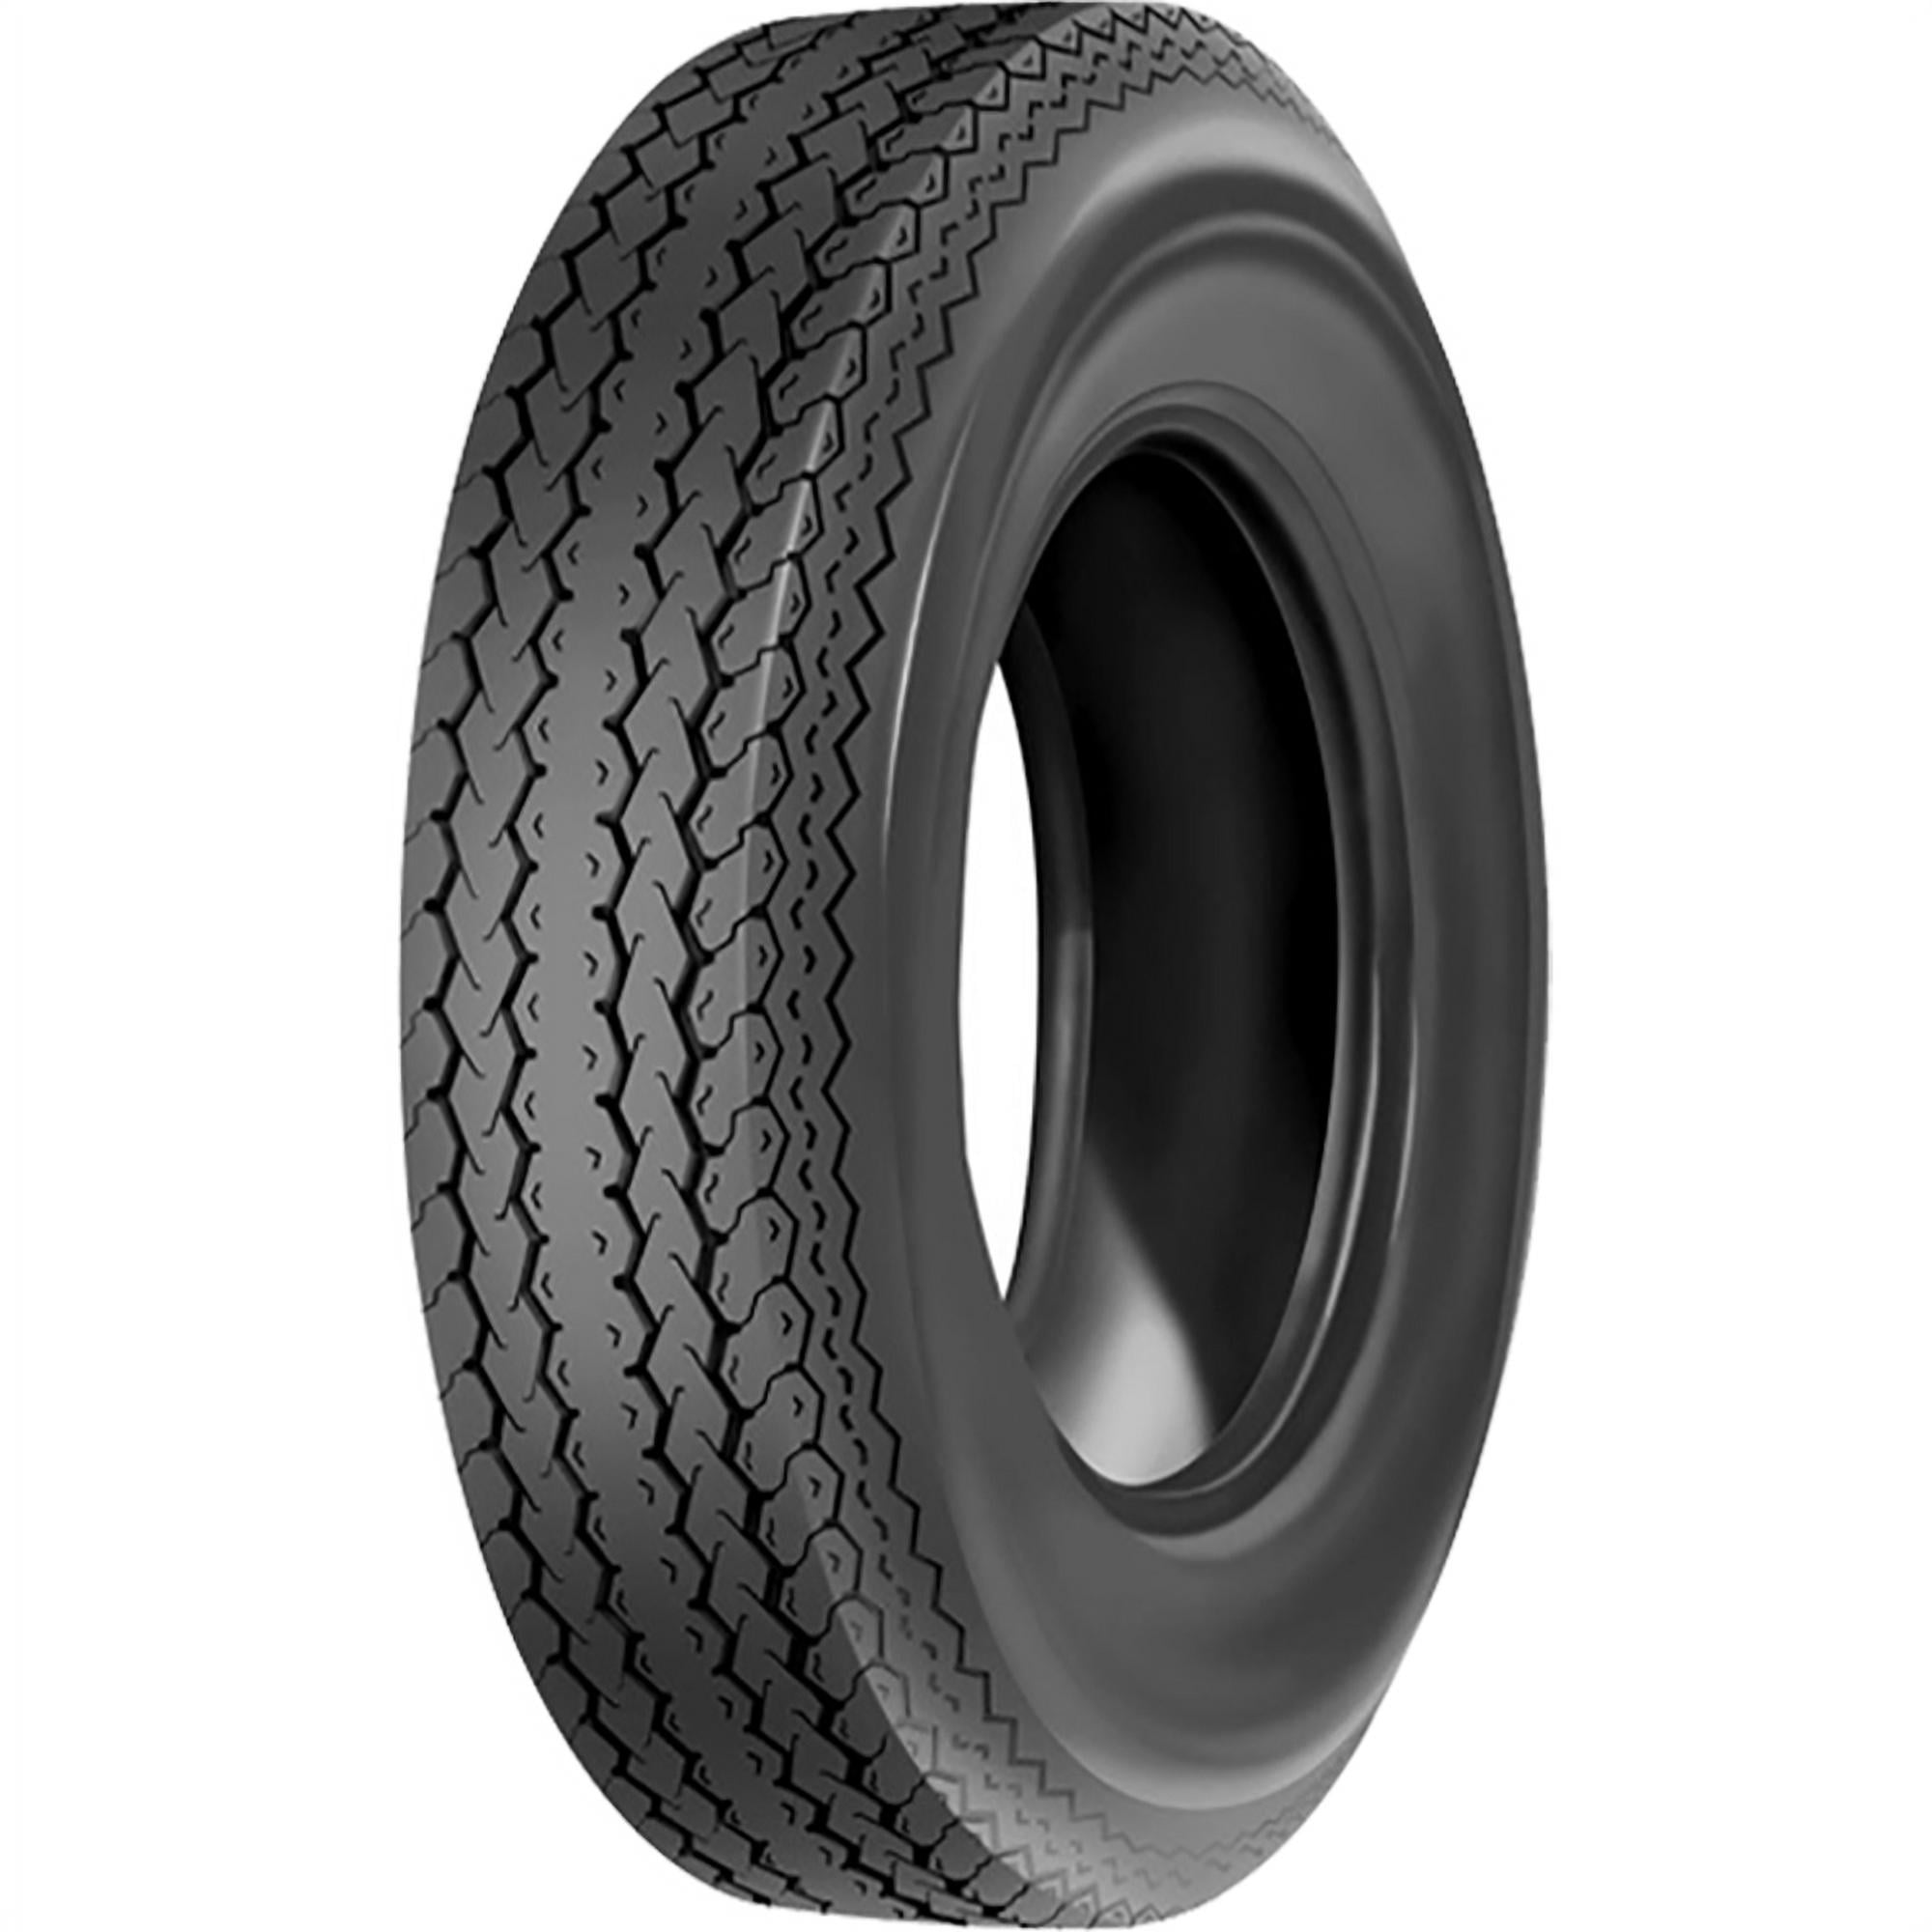 2  ST185/80D13 6 Ply Deestone Trailer Tires DS7283 Heavy Duty FREE SHIPPING!! 